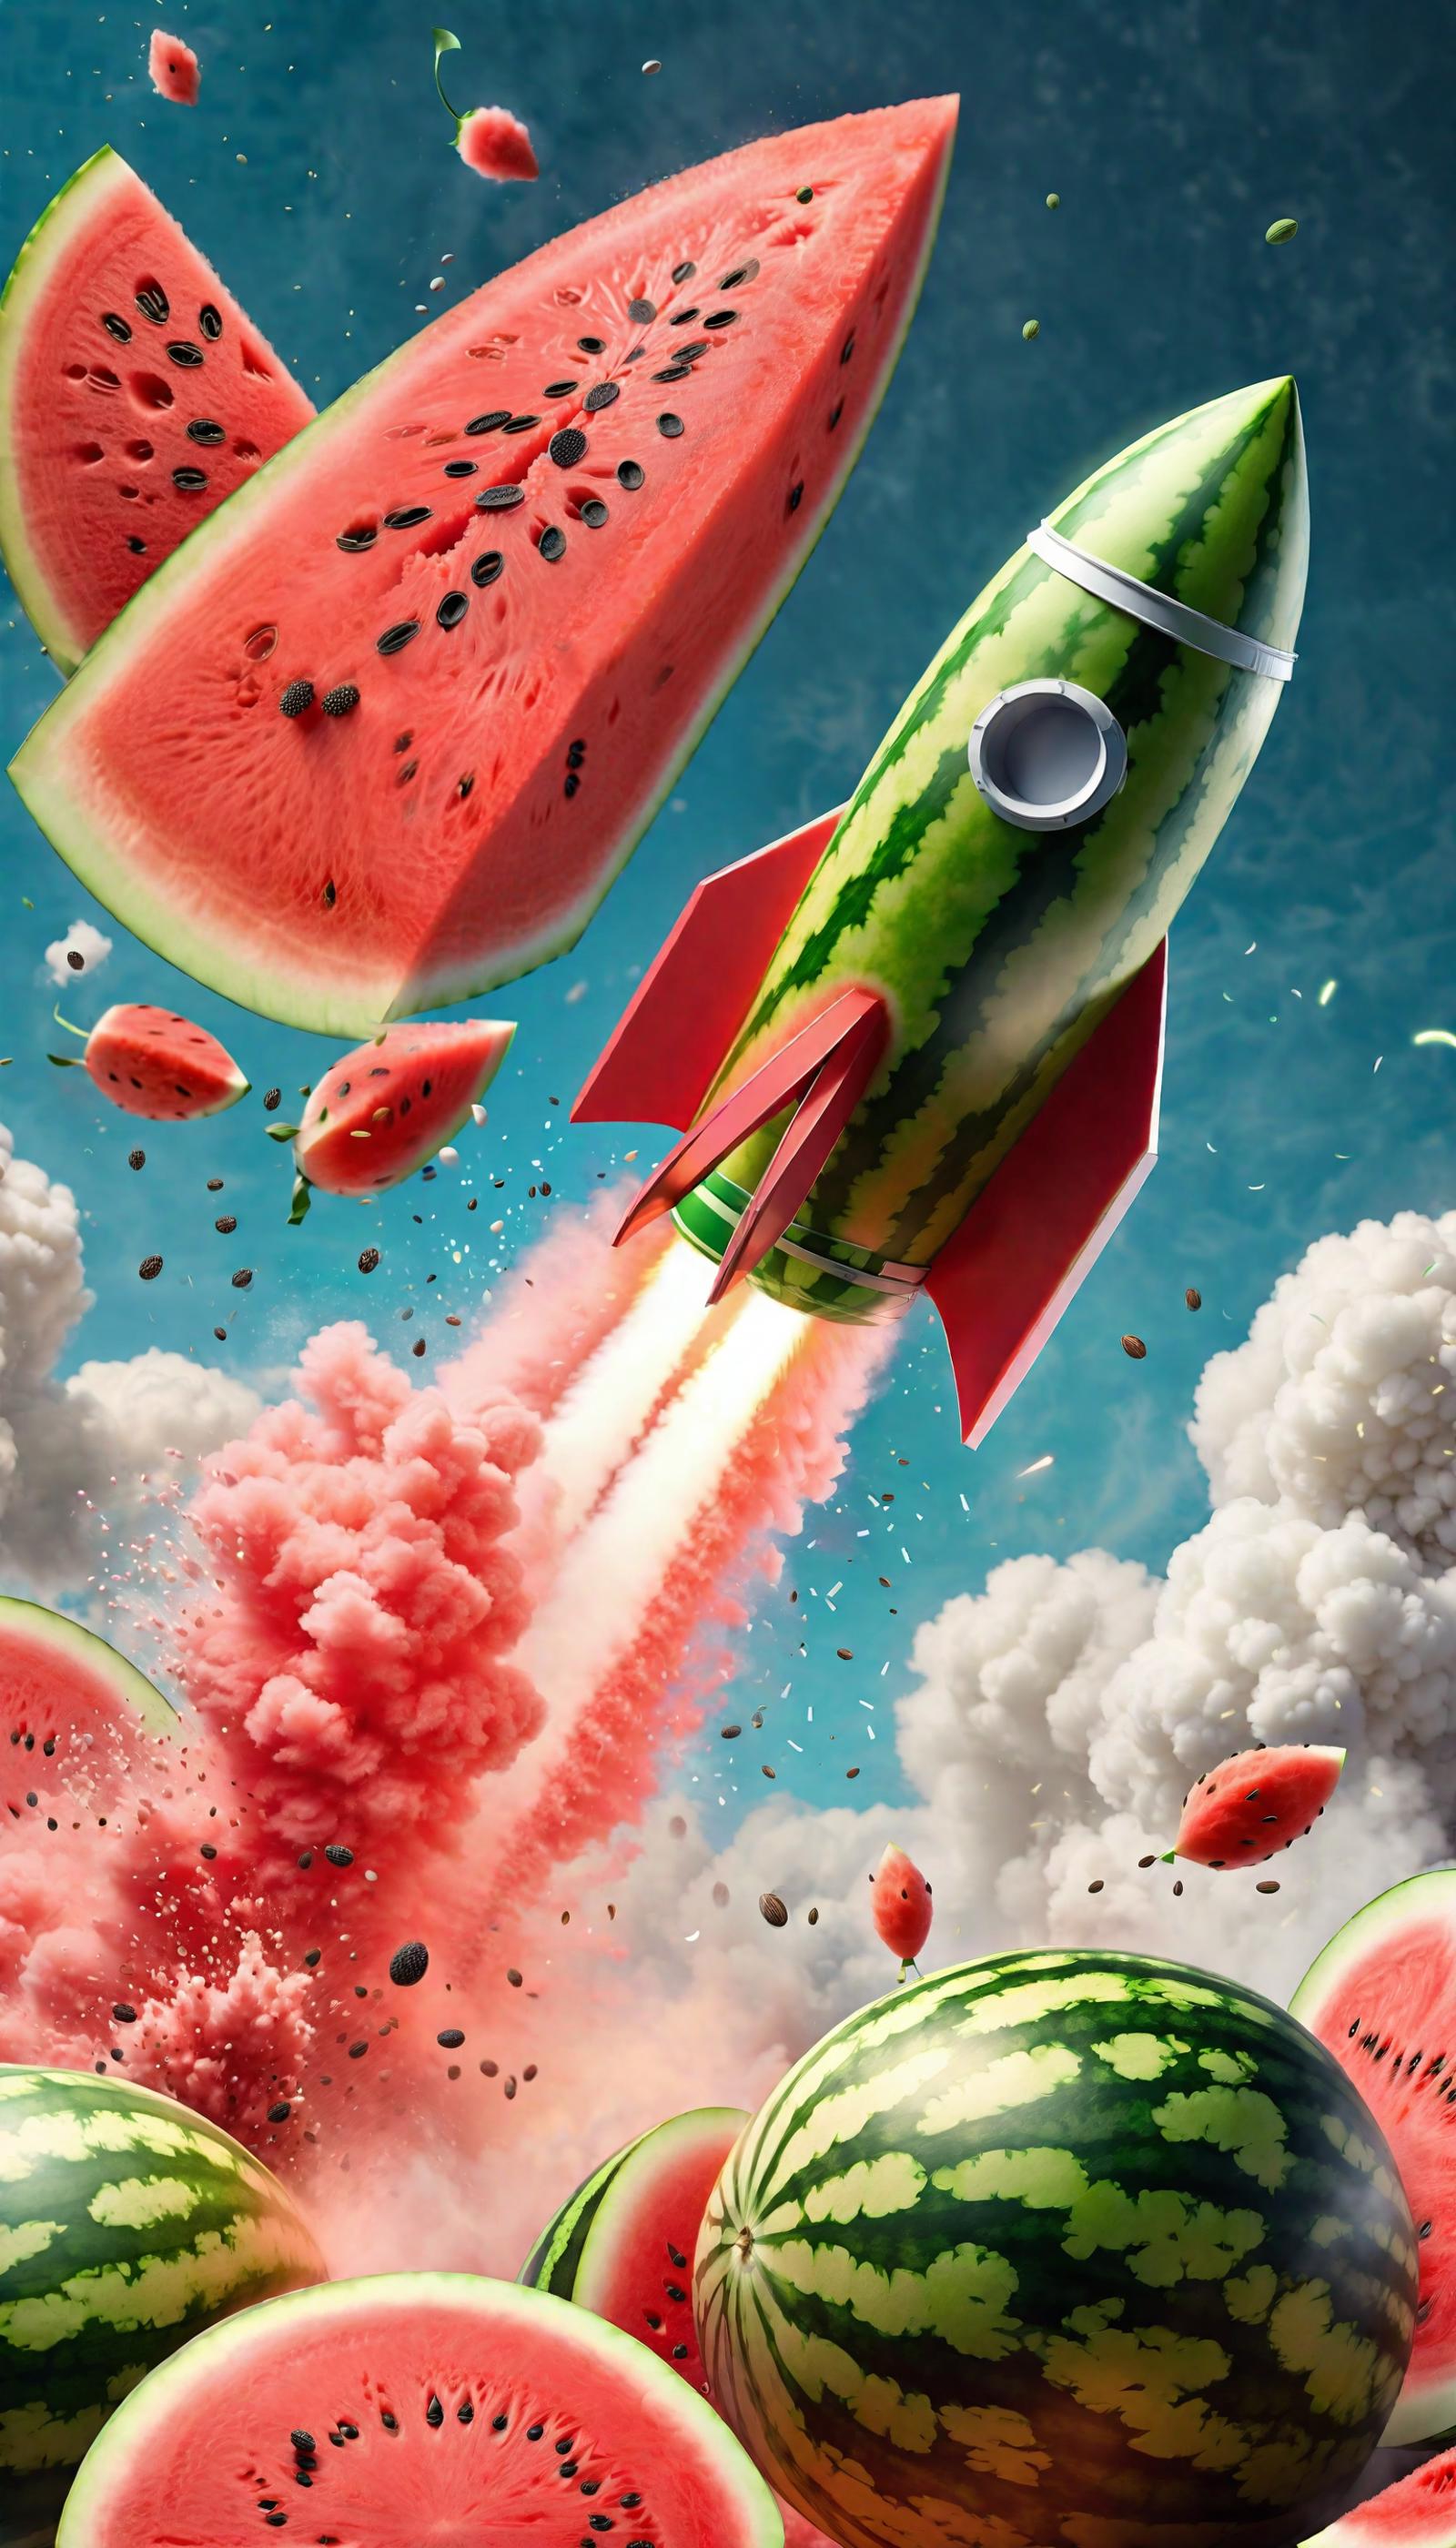 Rocket Ship Launching into Space with Watermelon Clouds and Exploding Fruit

In this image, a rocket ship is launching into space, surrounded by clouds made of watermelon and other fruit. The scene is set against a blue sky, creating a vibrant and colorful atmosphere. The rocket itself is red and white, adding a striking contrast to the fruit clouds.

In addition to the watermelon clouds, there are also other fruit elements in the image, such as bananas and oranges. These fruits are